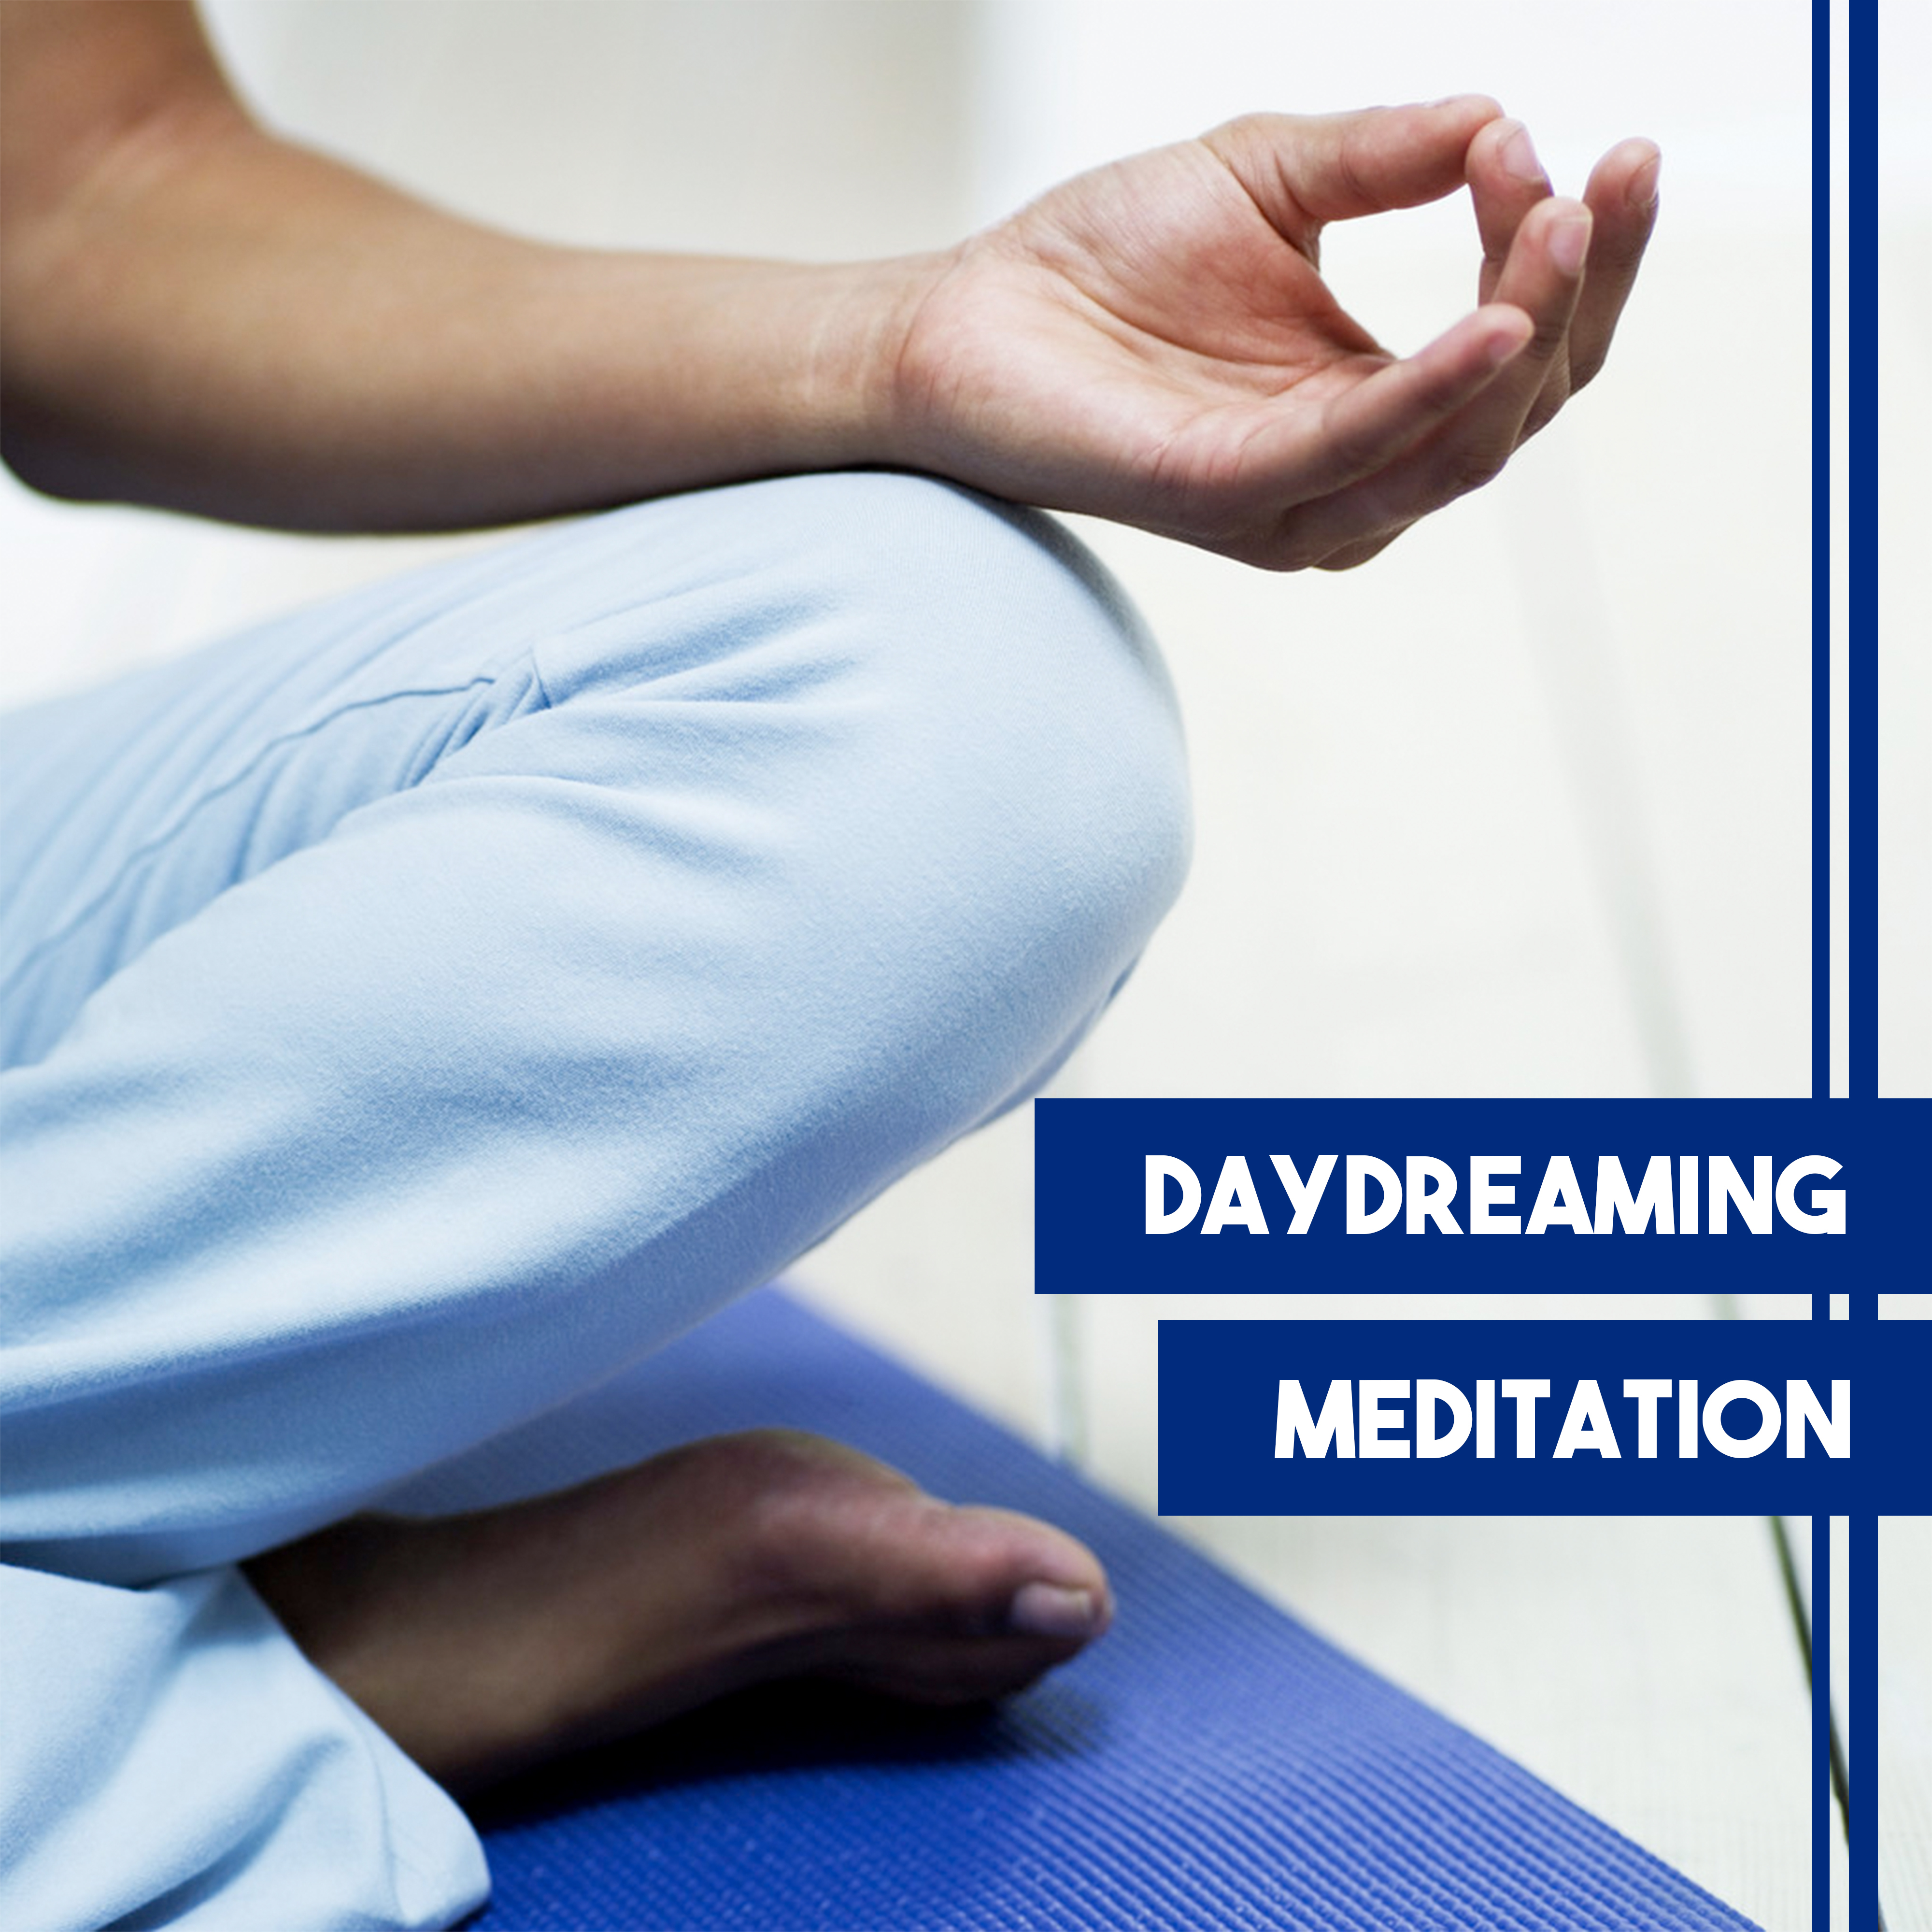 Daydreaming Meditation  Ultimate Meditation Music, Yoga, Pilates, Contemplation, Relax, Sounds of Nature